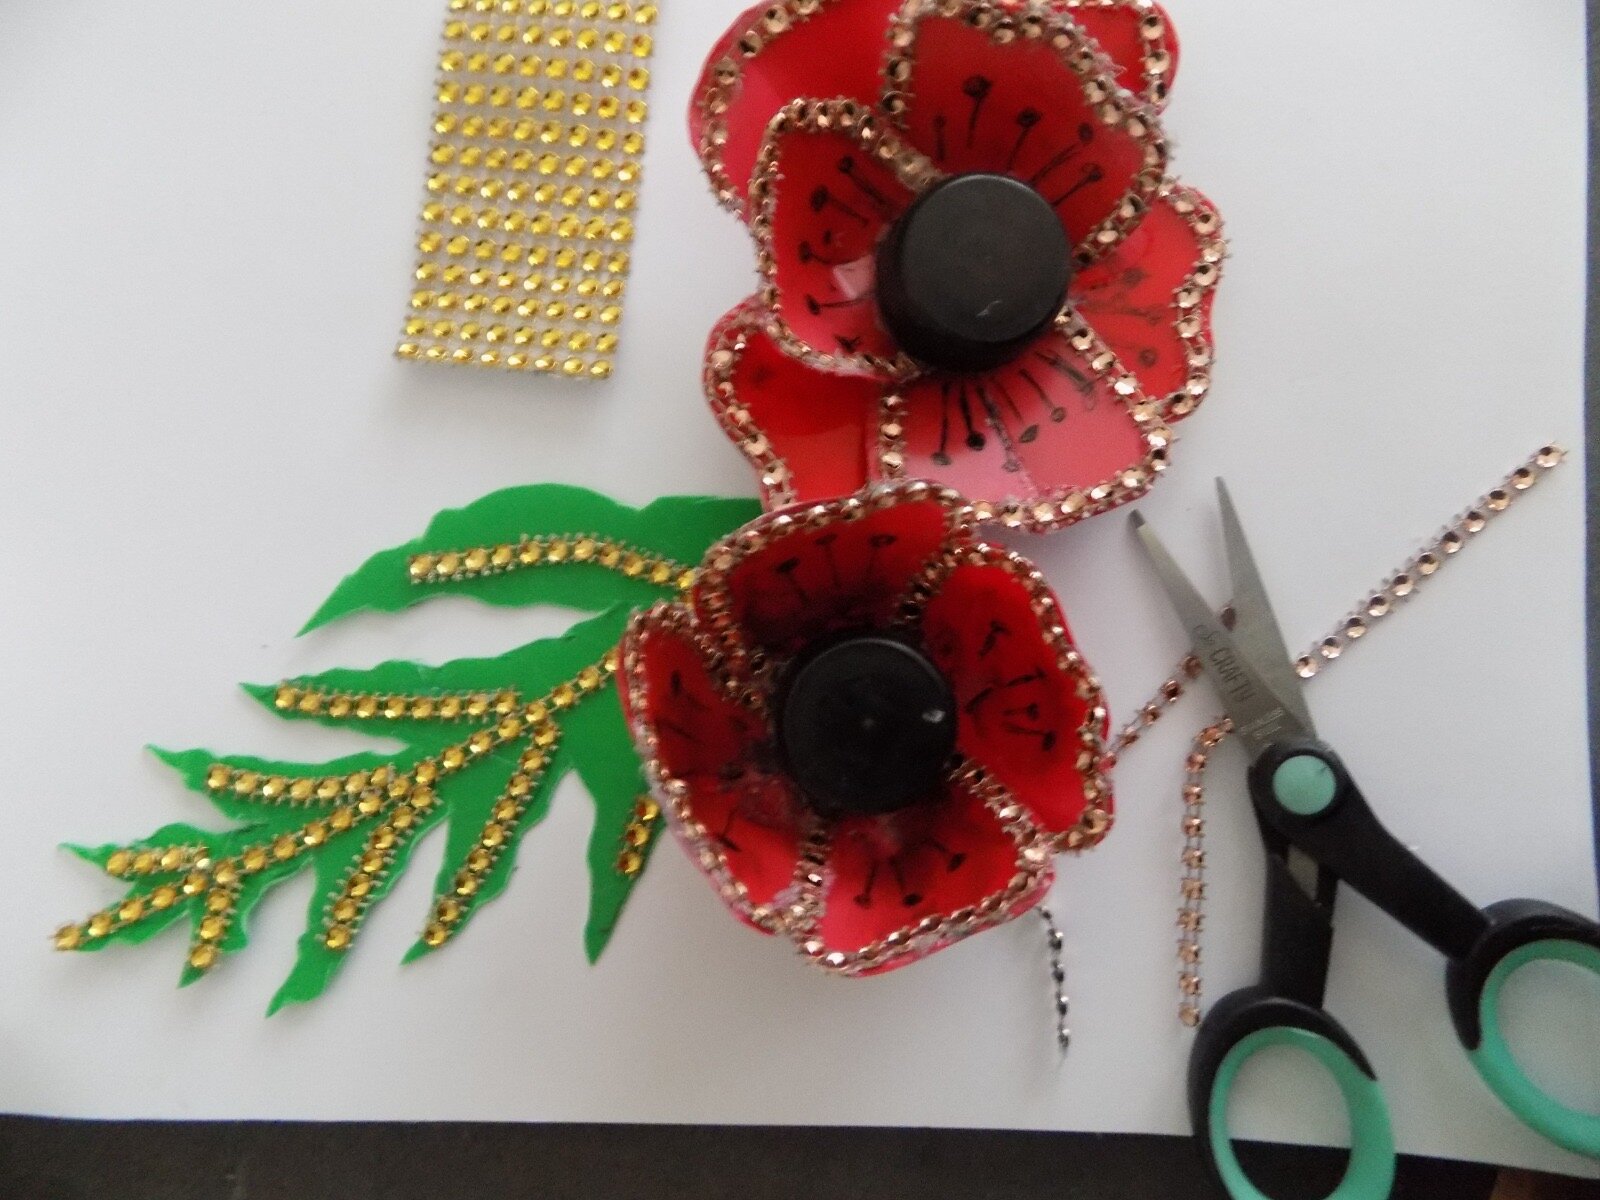 Sequins, scissors and a poppy made from recycled plastic materials